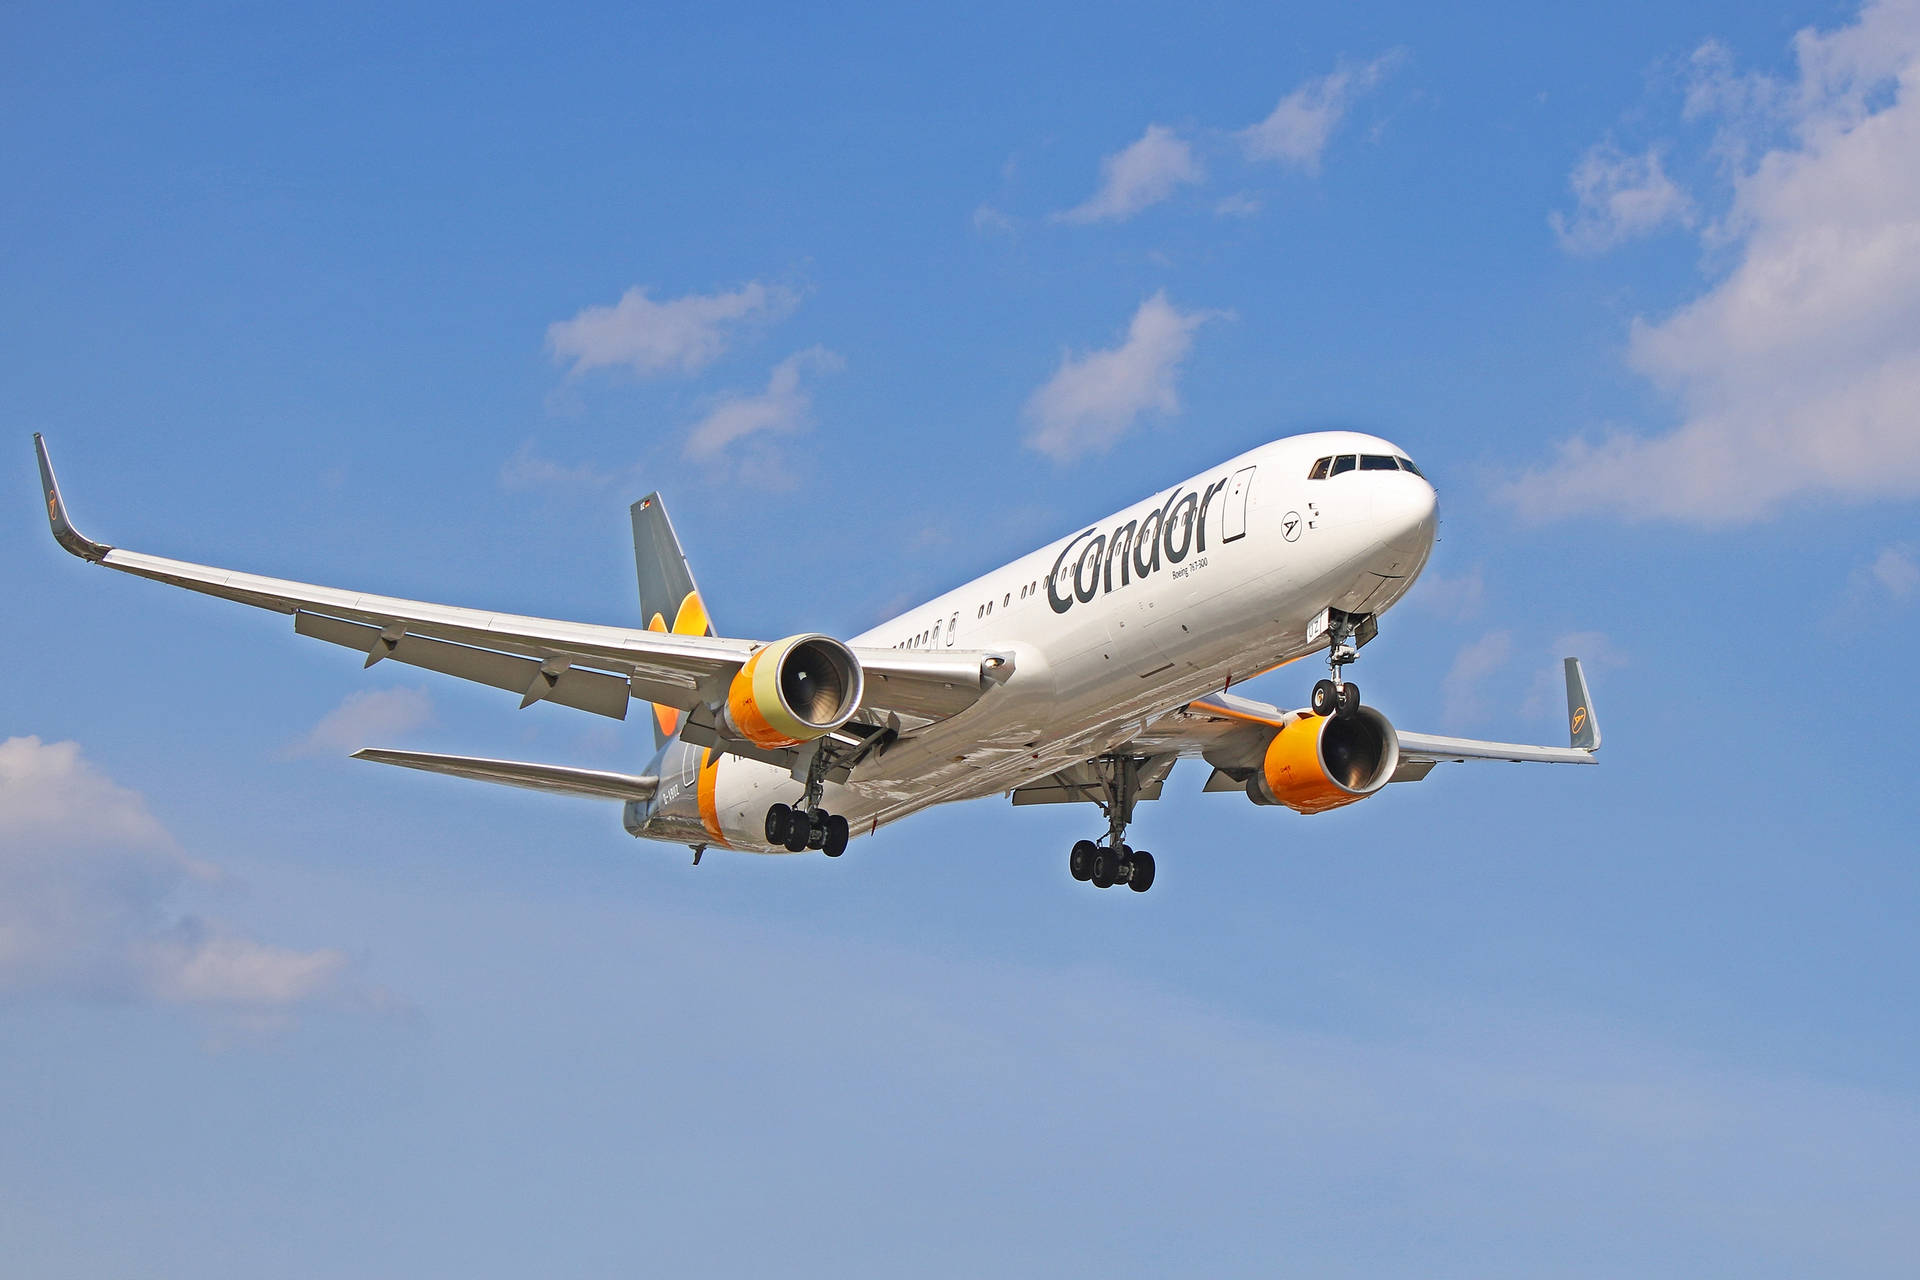 Condor Airlines Flying Airplane Up In The Sky Wallpaper